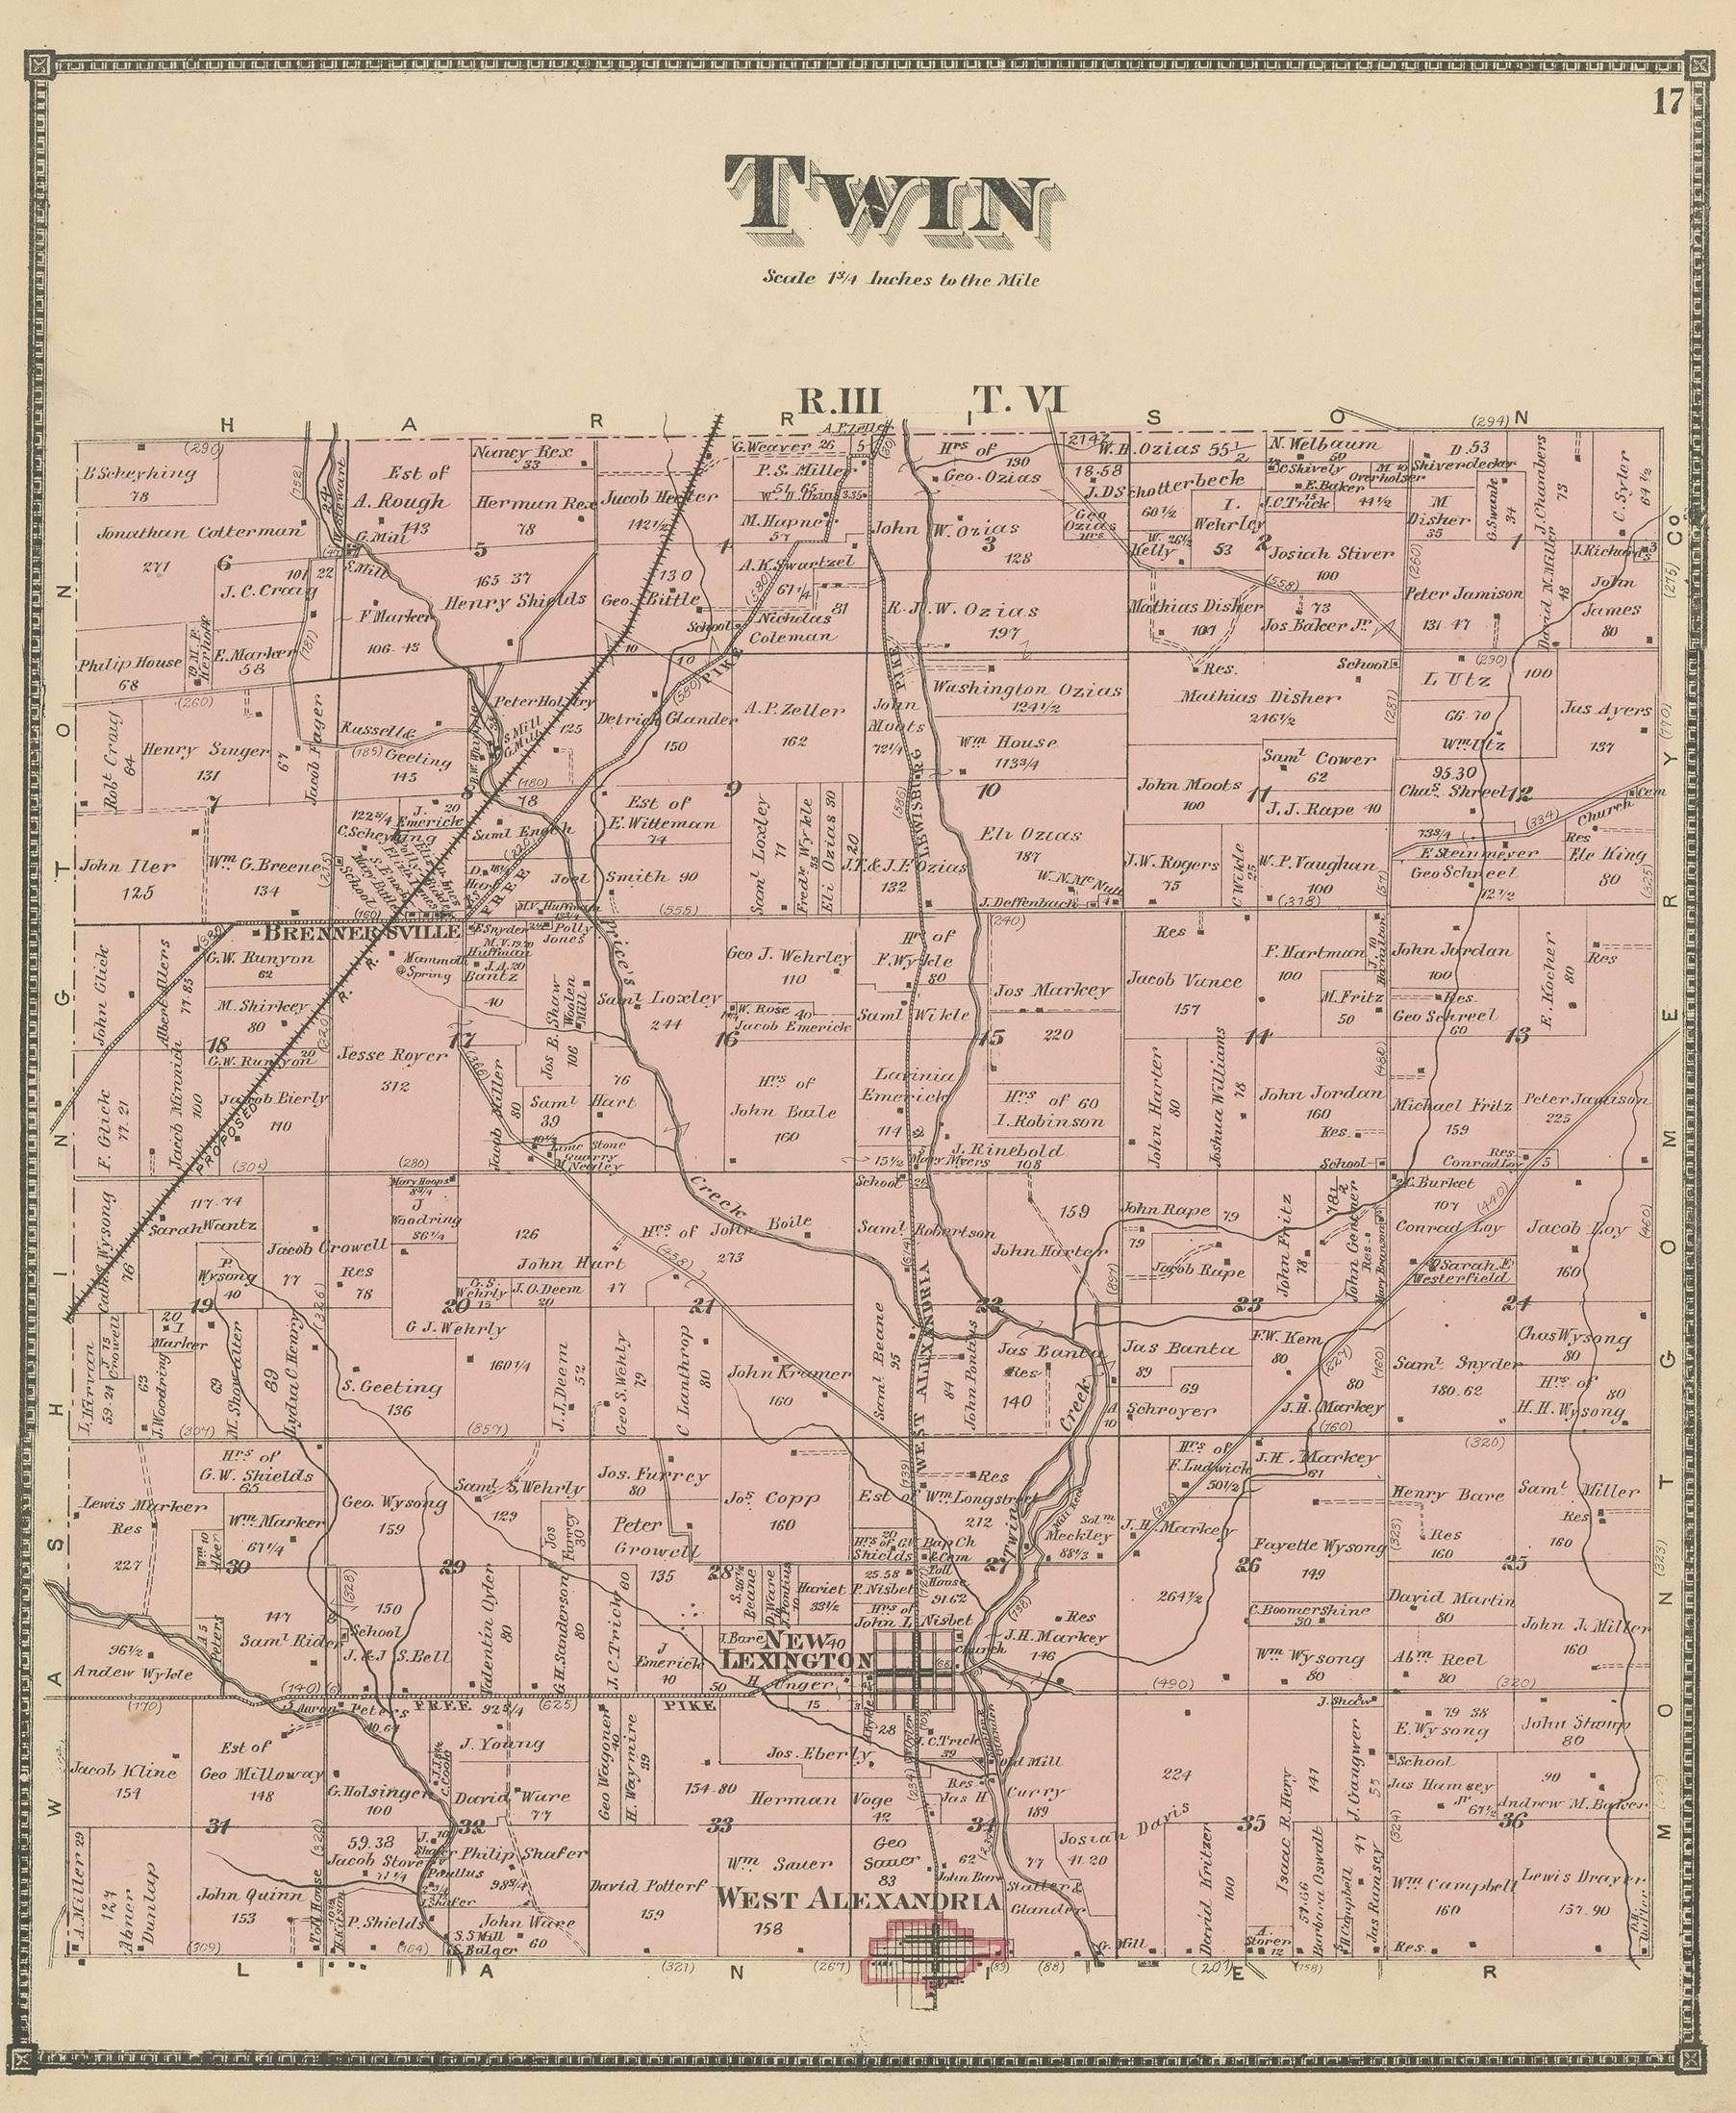 Antique map titled 'Twin'. Original antique map of Twin, Ohio. This map originates from 'Atlas of Preble County Ohio' by C.O. Titus. Published 1871.